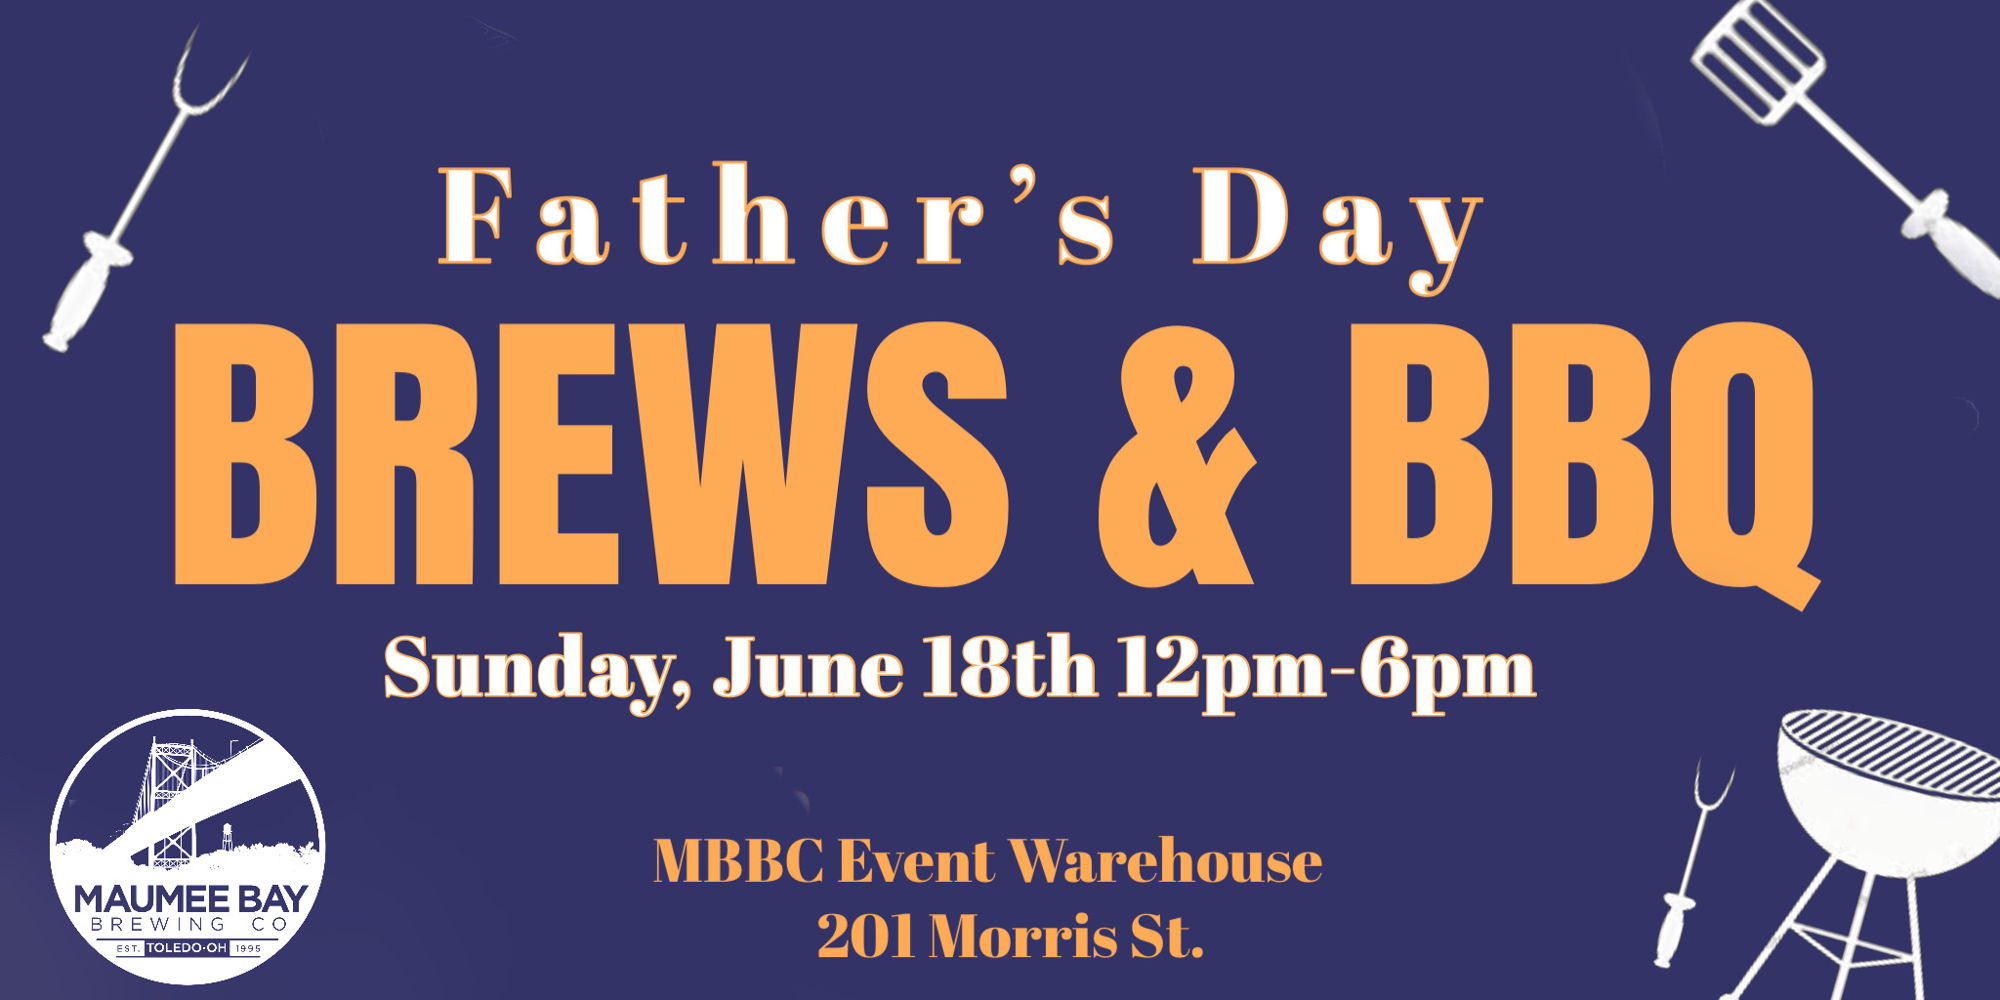 Father's Day Brew & BBQ promotional image